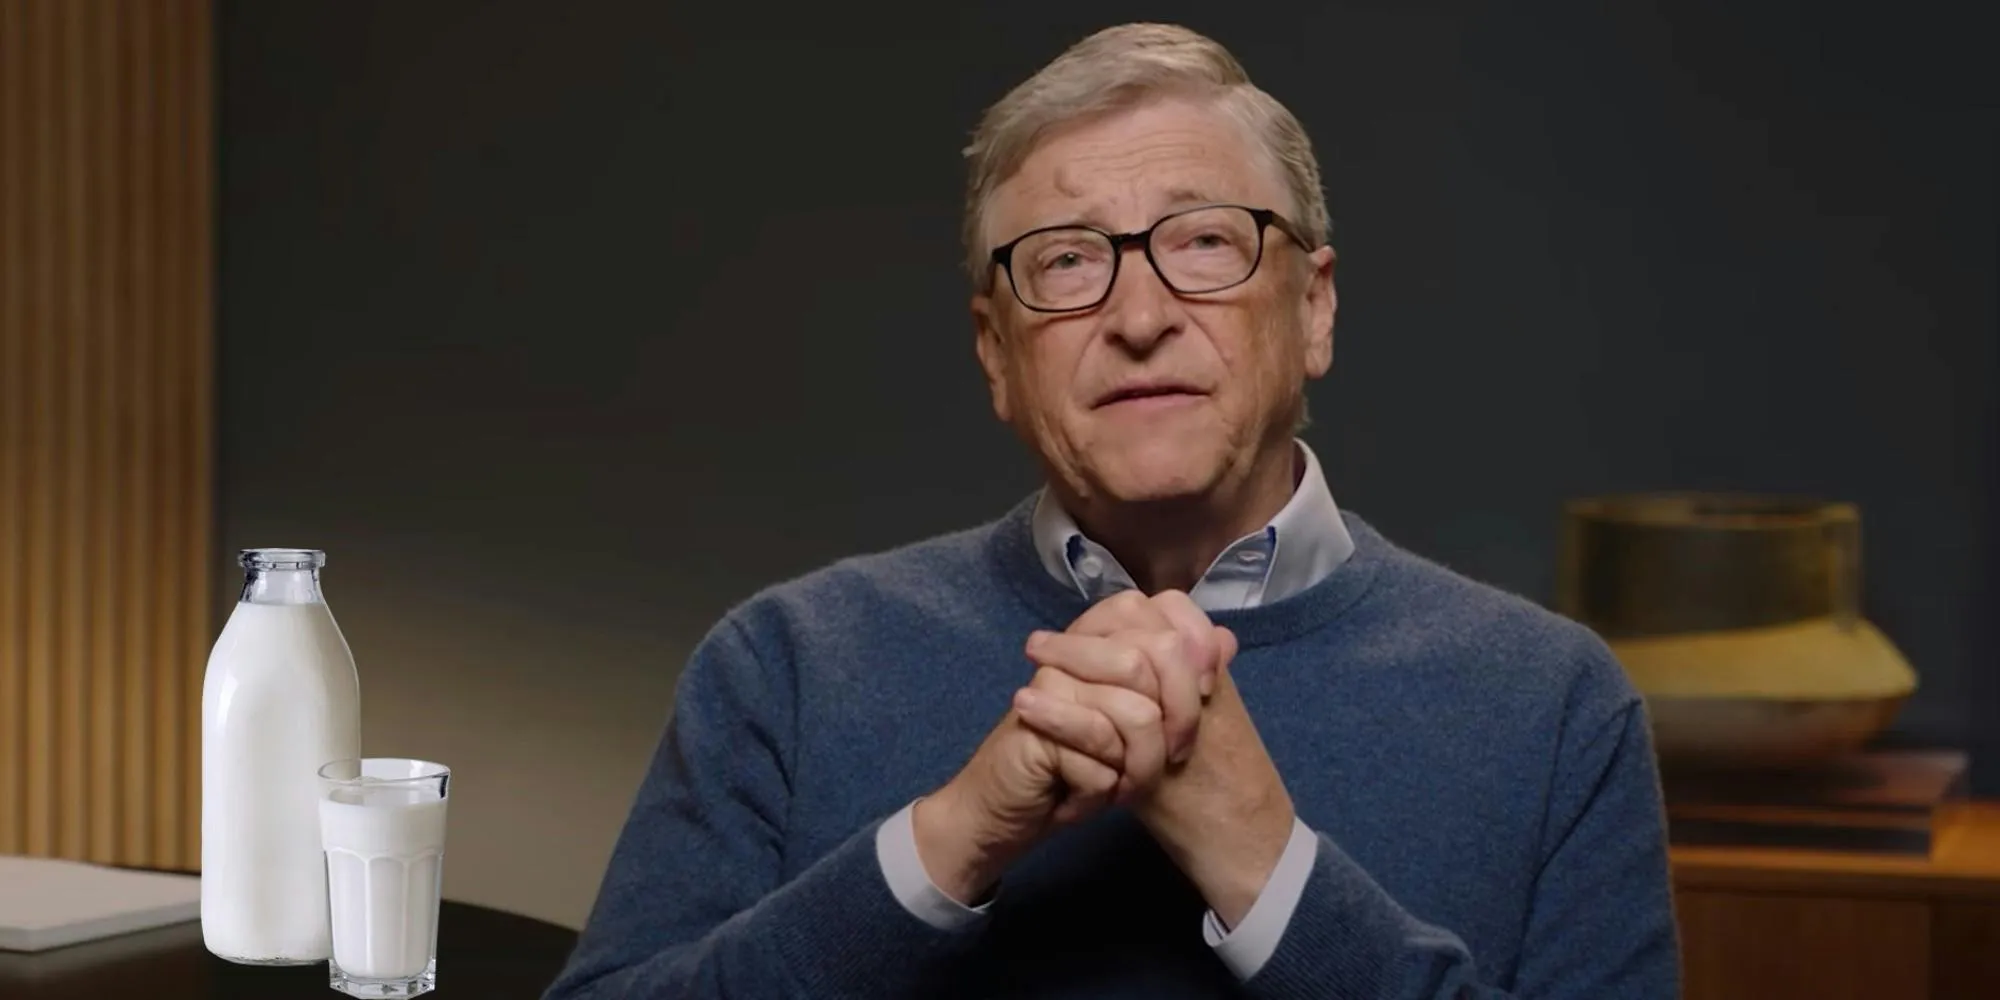 Bill Gates Promotes ‘Maggot Milk’ as Solution to Child Nutrition Amid Manufactured Food Crisis